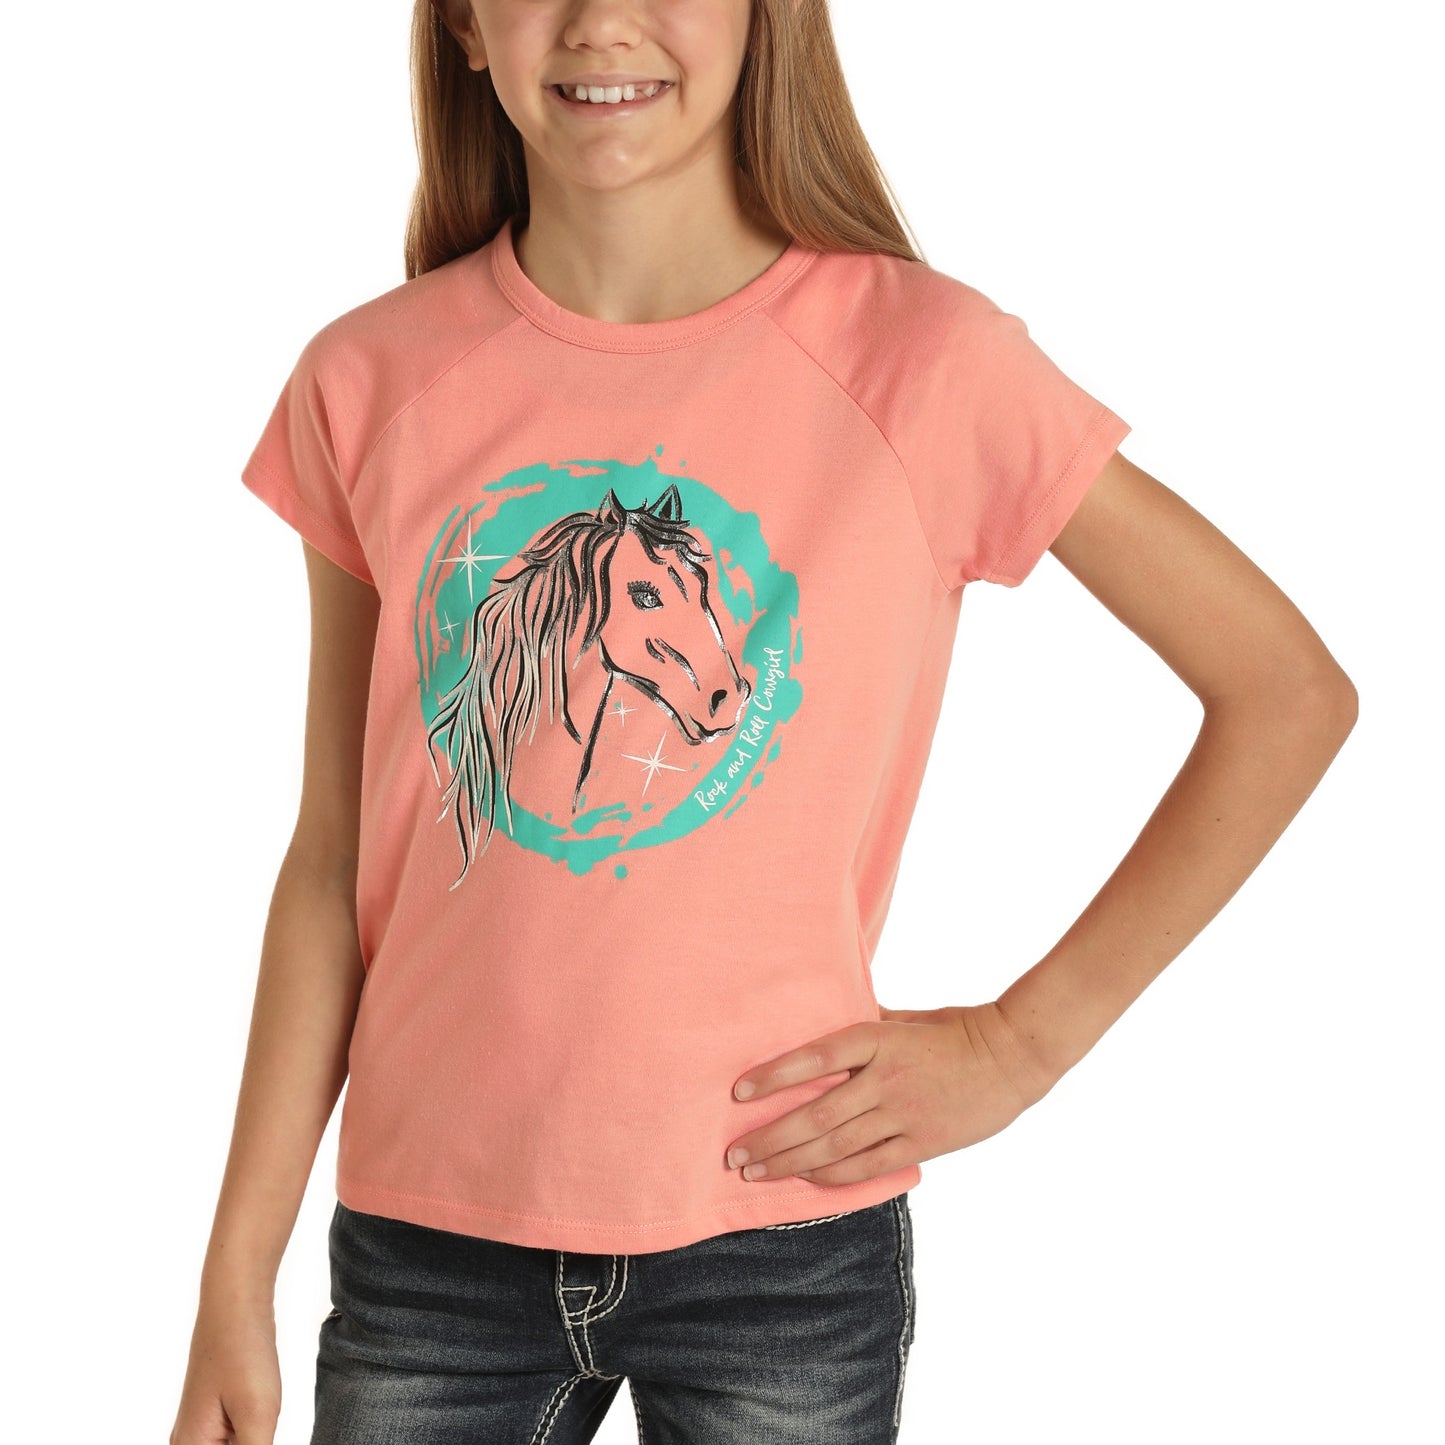 Rock & Roll Cowgirl Children's Horse Graphic Pink T-Shirt G3T8123